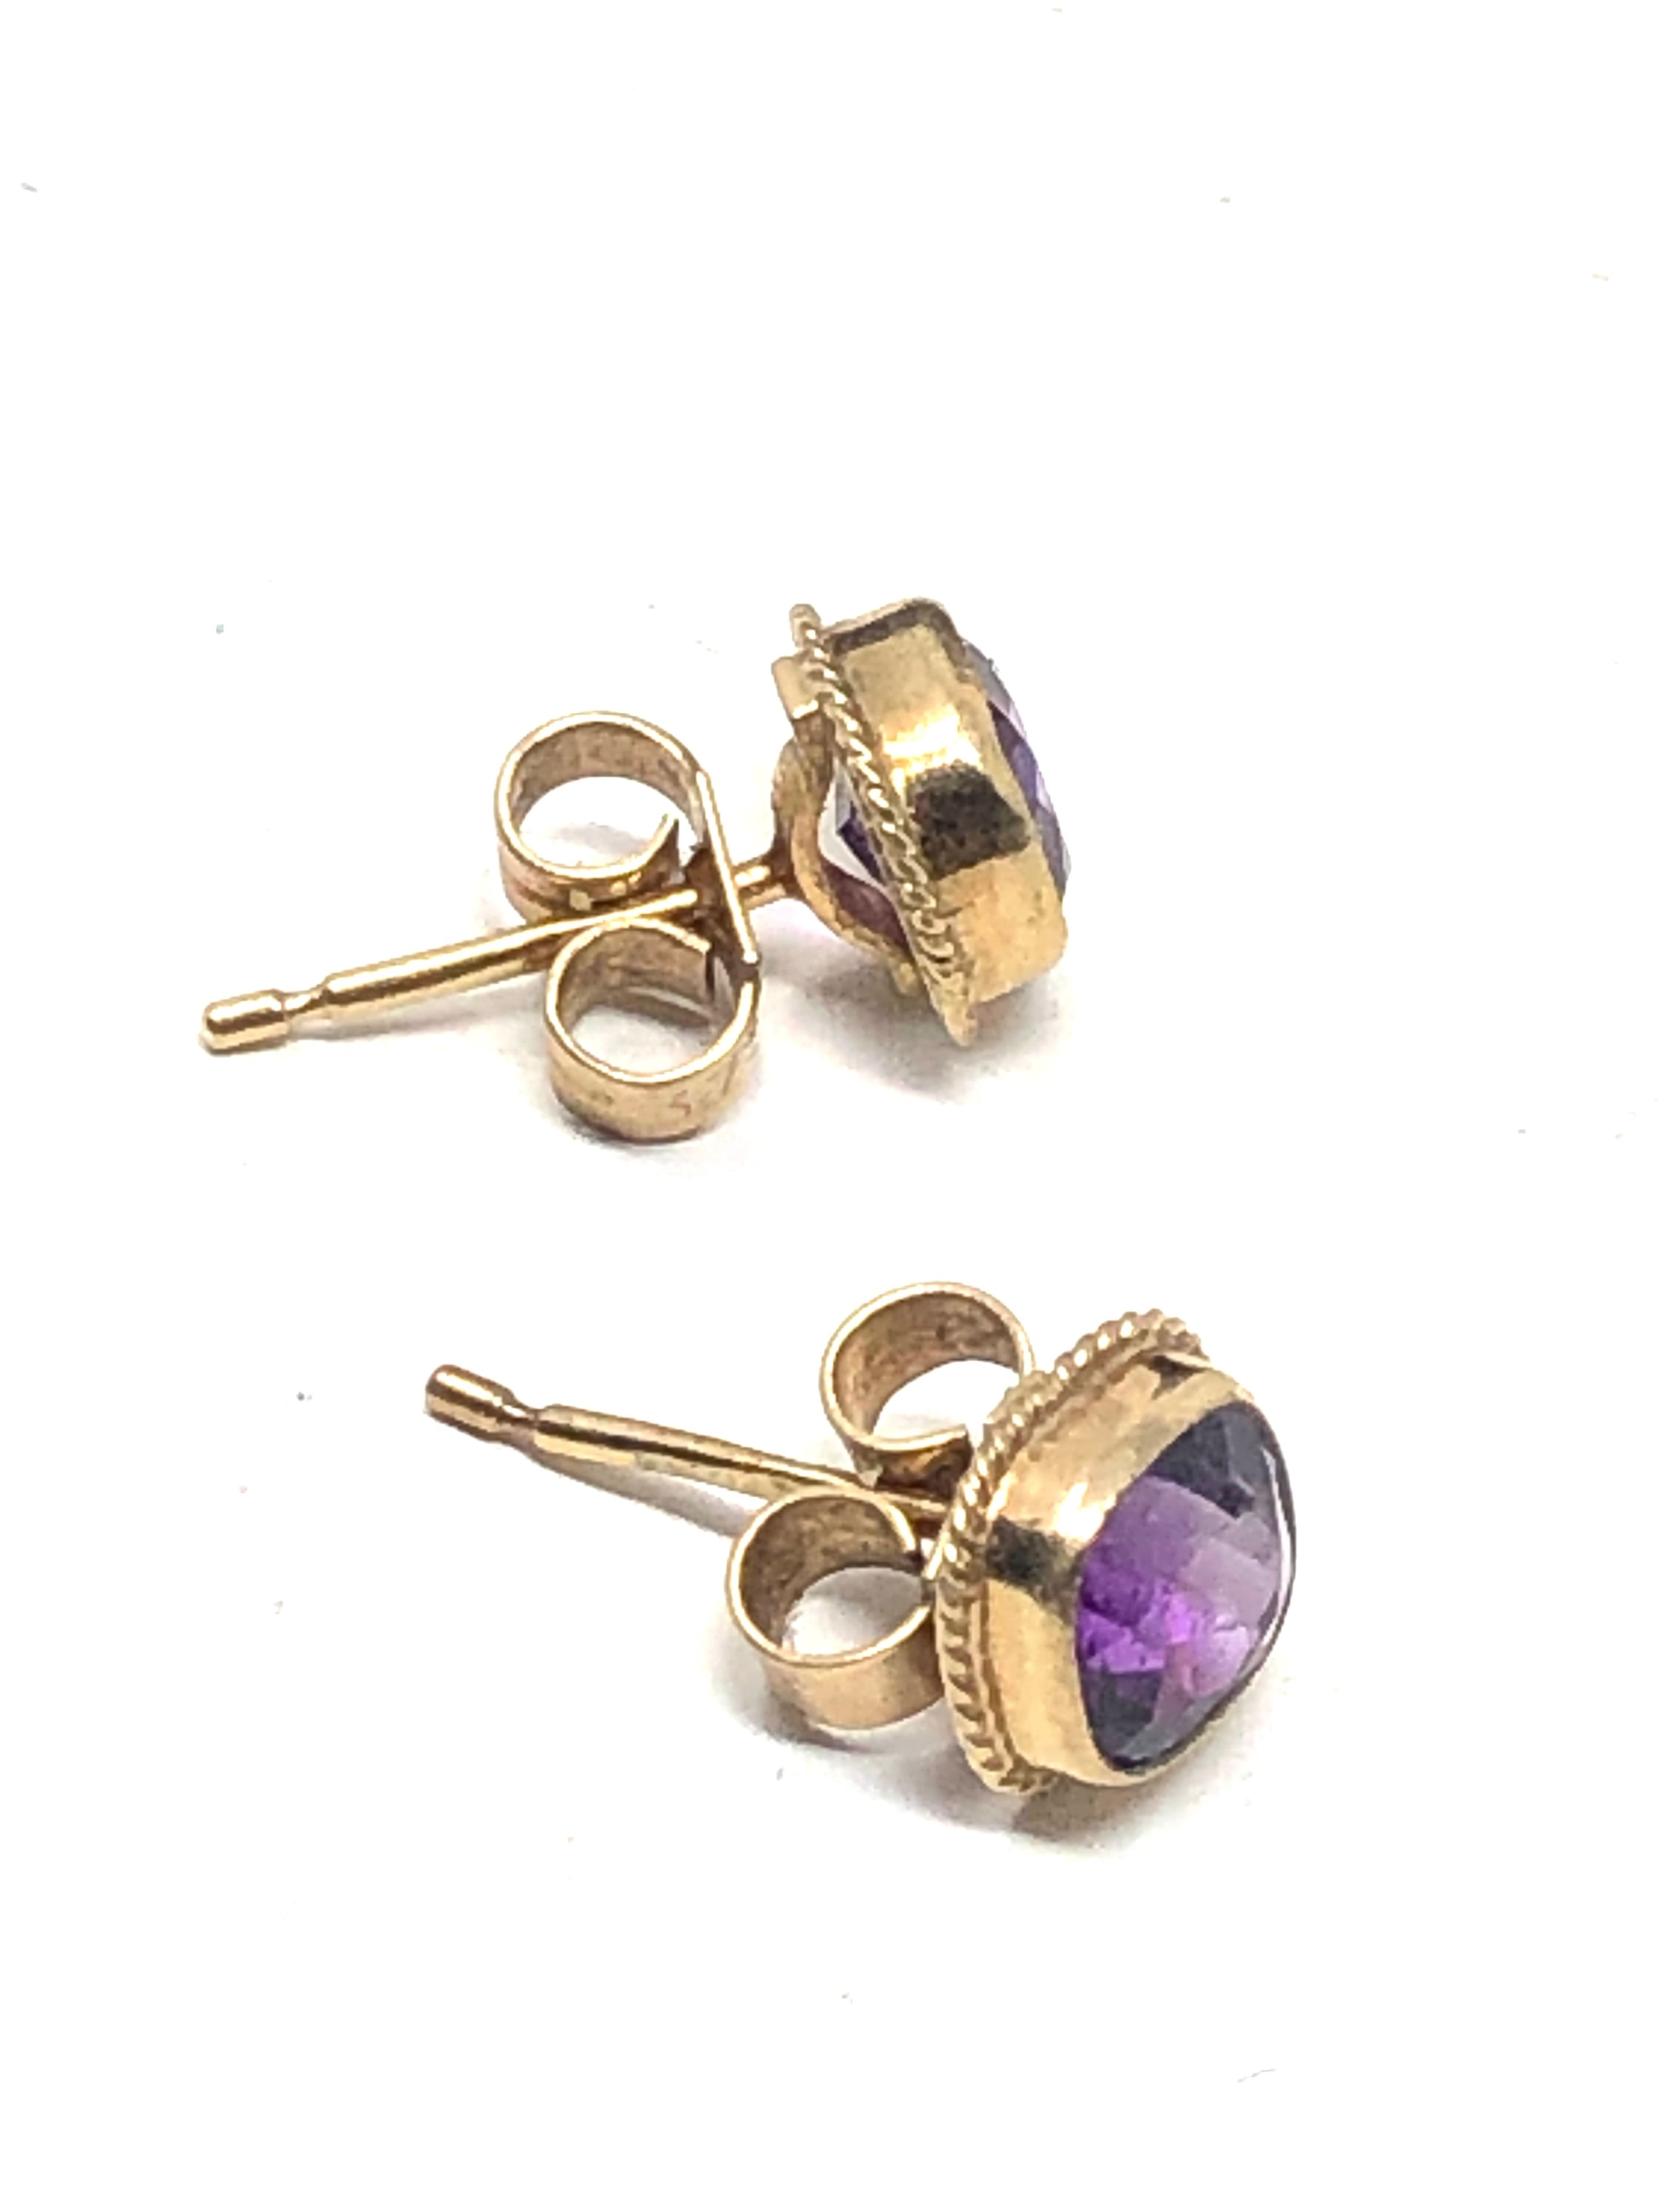 9ct gold amethyst earrings weight 1.1g - Image 4 of 4